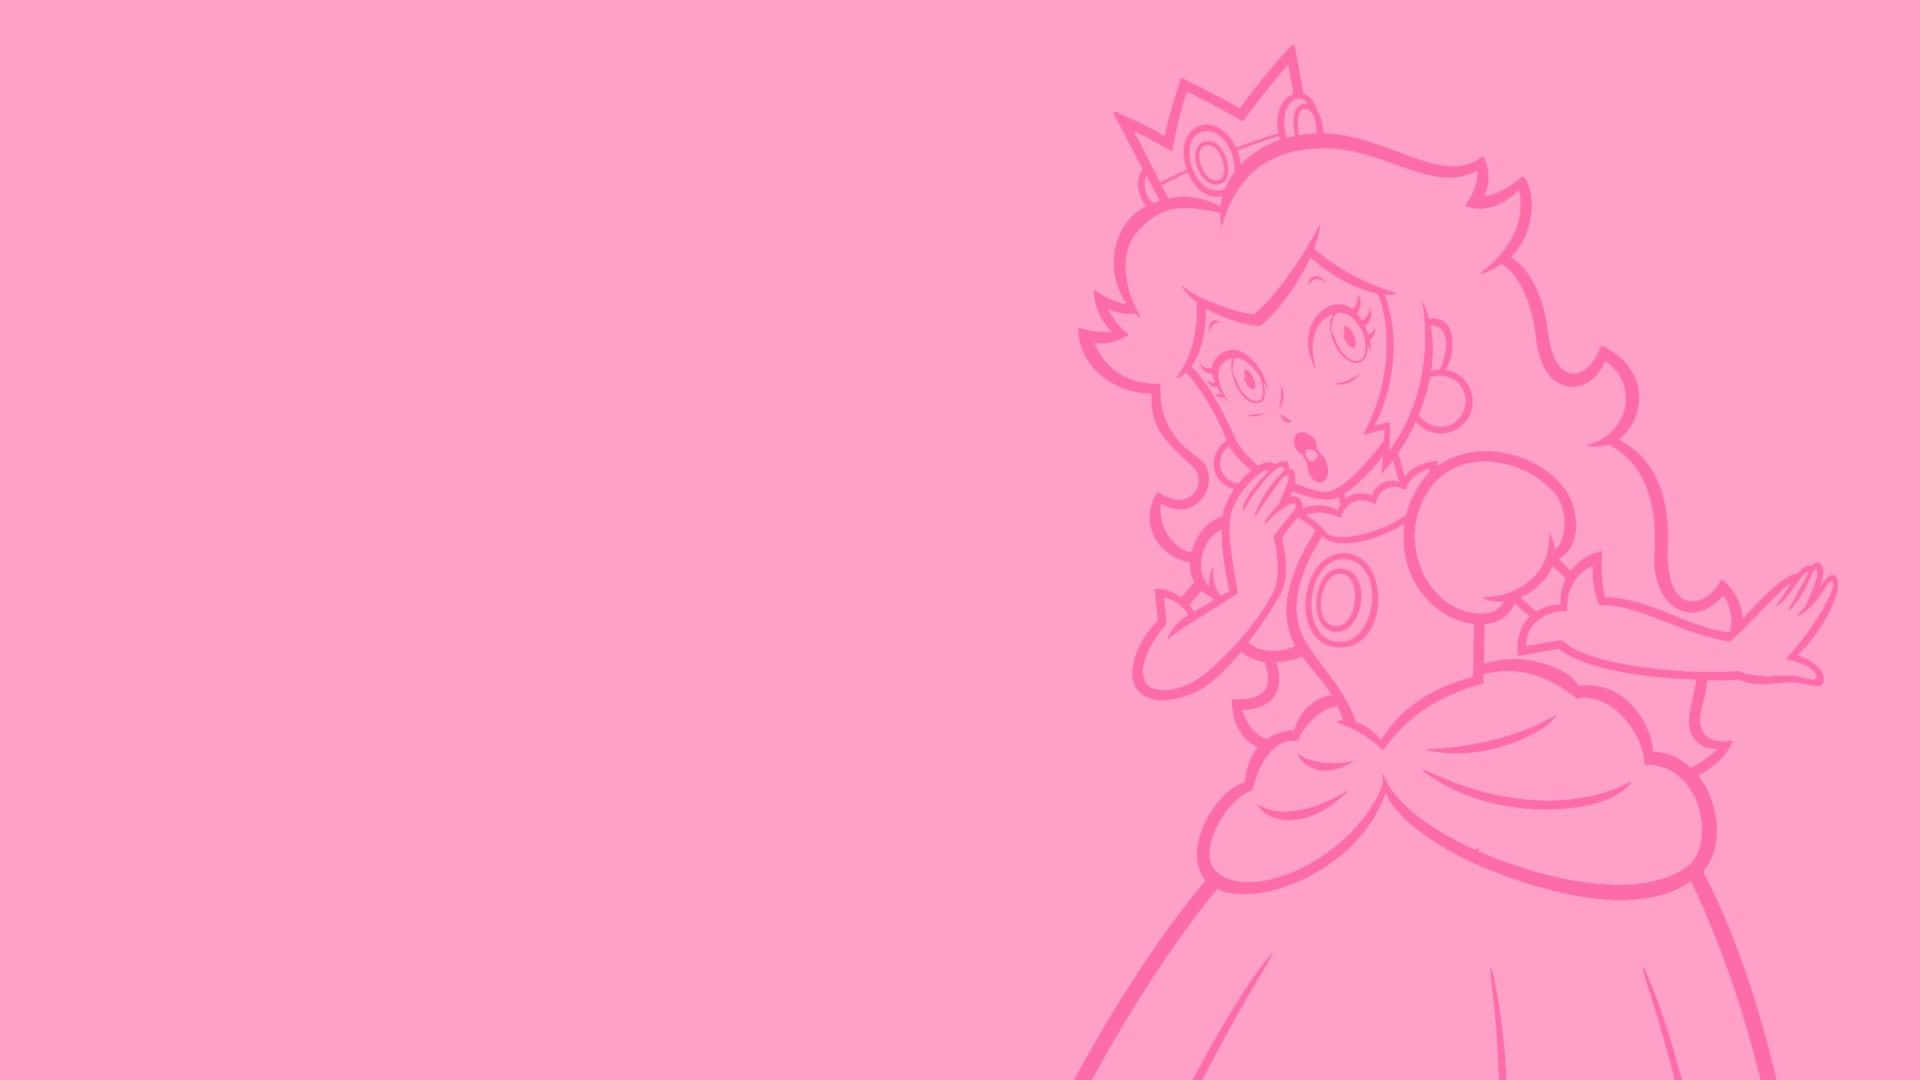 Celebrate the color and regal beauty of Princess Peach Wallpaper